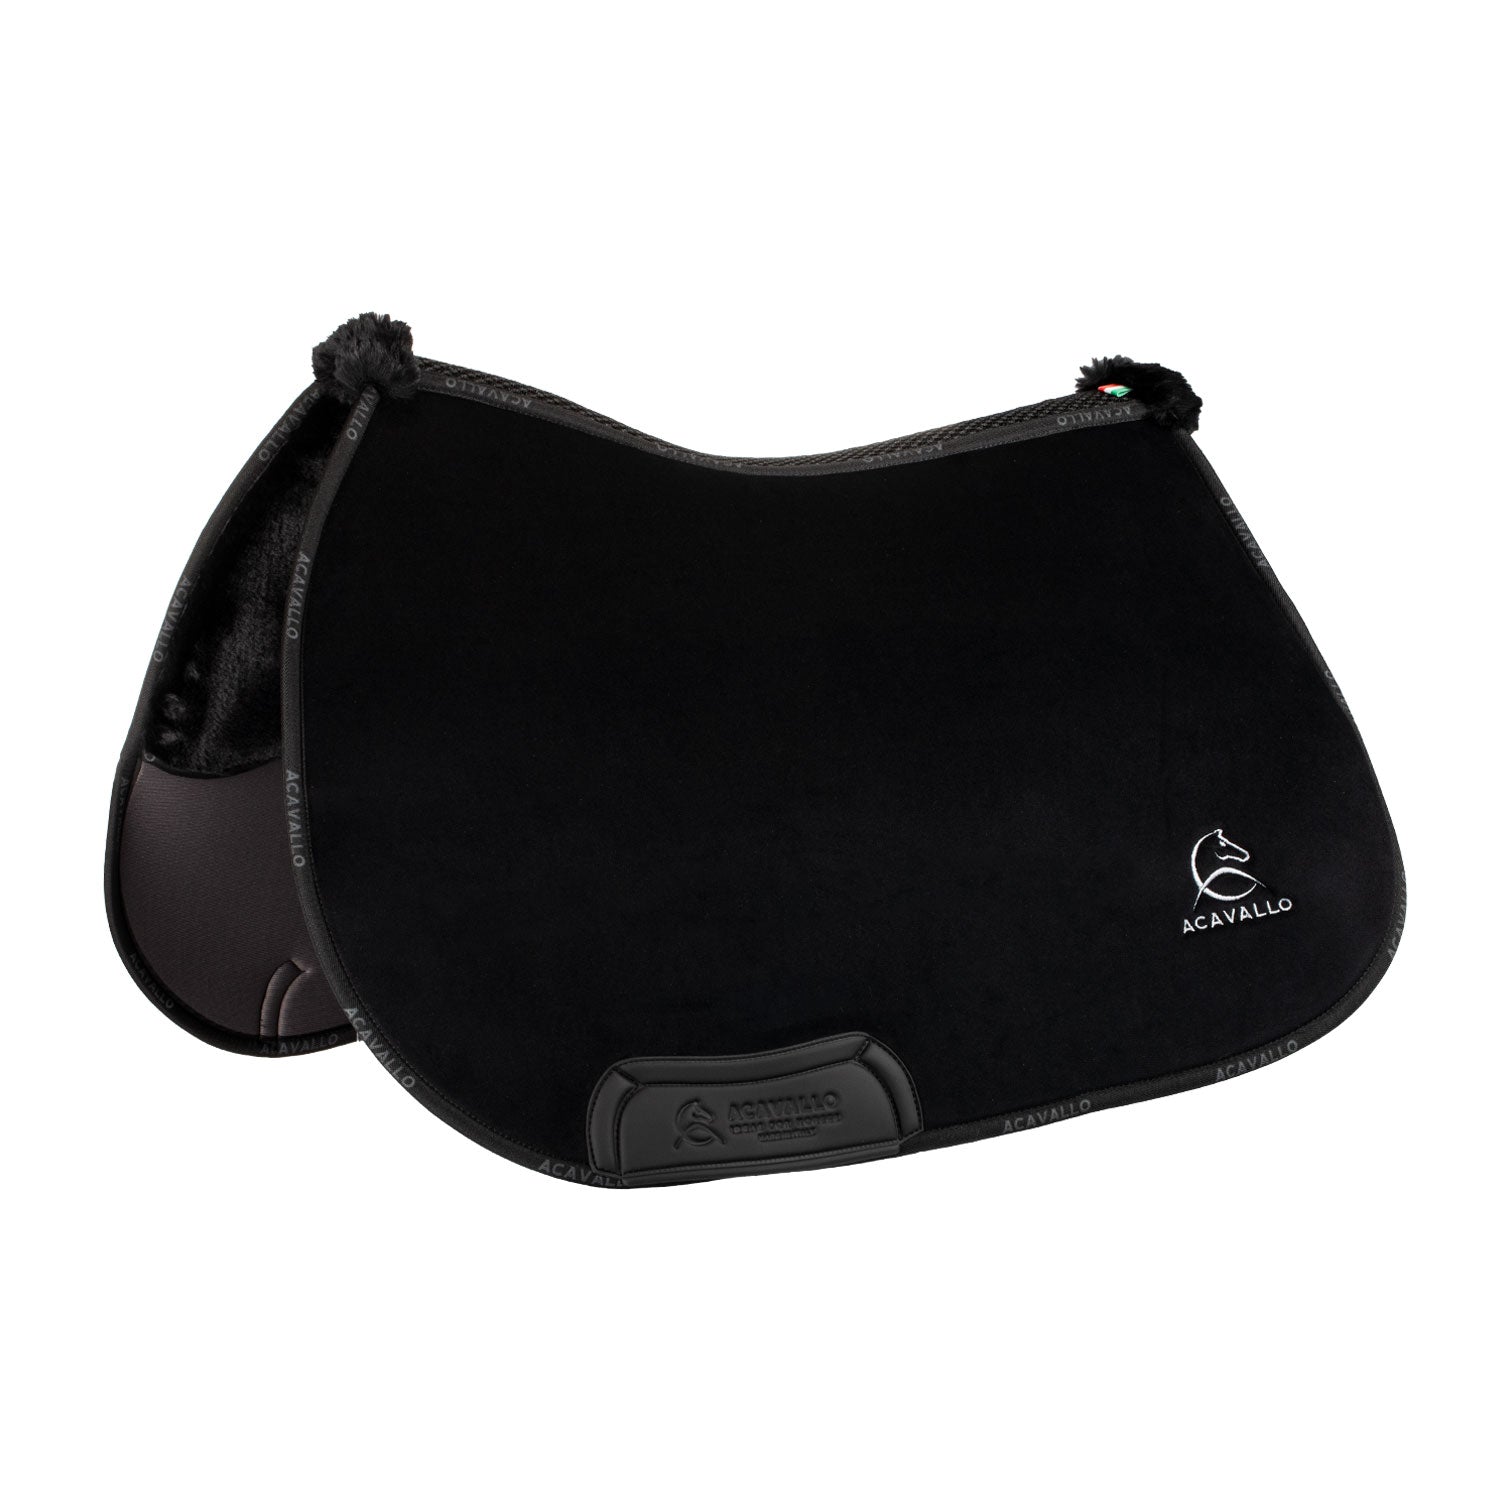 Pad LOUVRE SQUARE JUMPING PAD WITH UNDERSIDE ECO-WOOL - Reitstiefel Kandel - Dein Reitshop